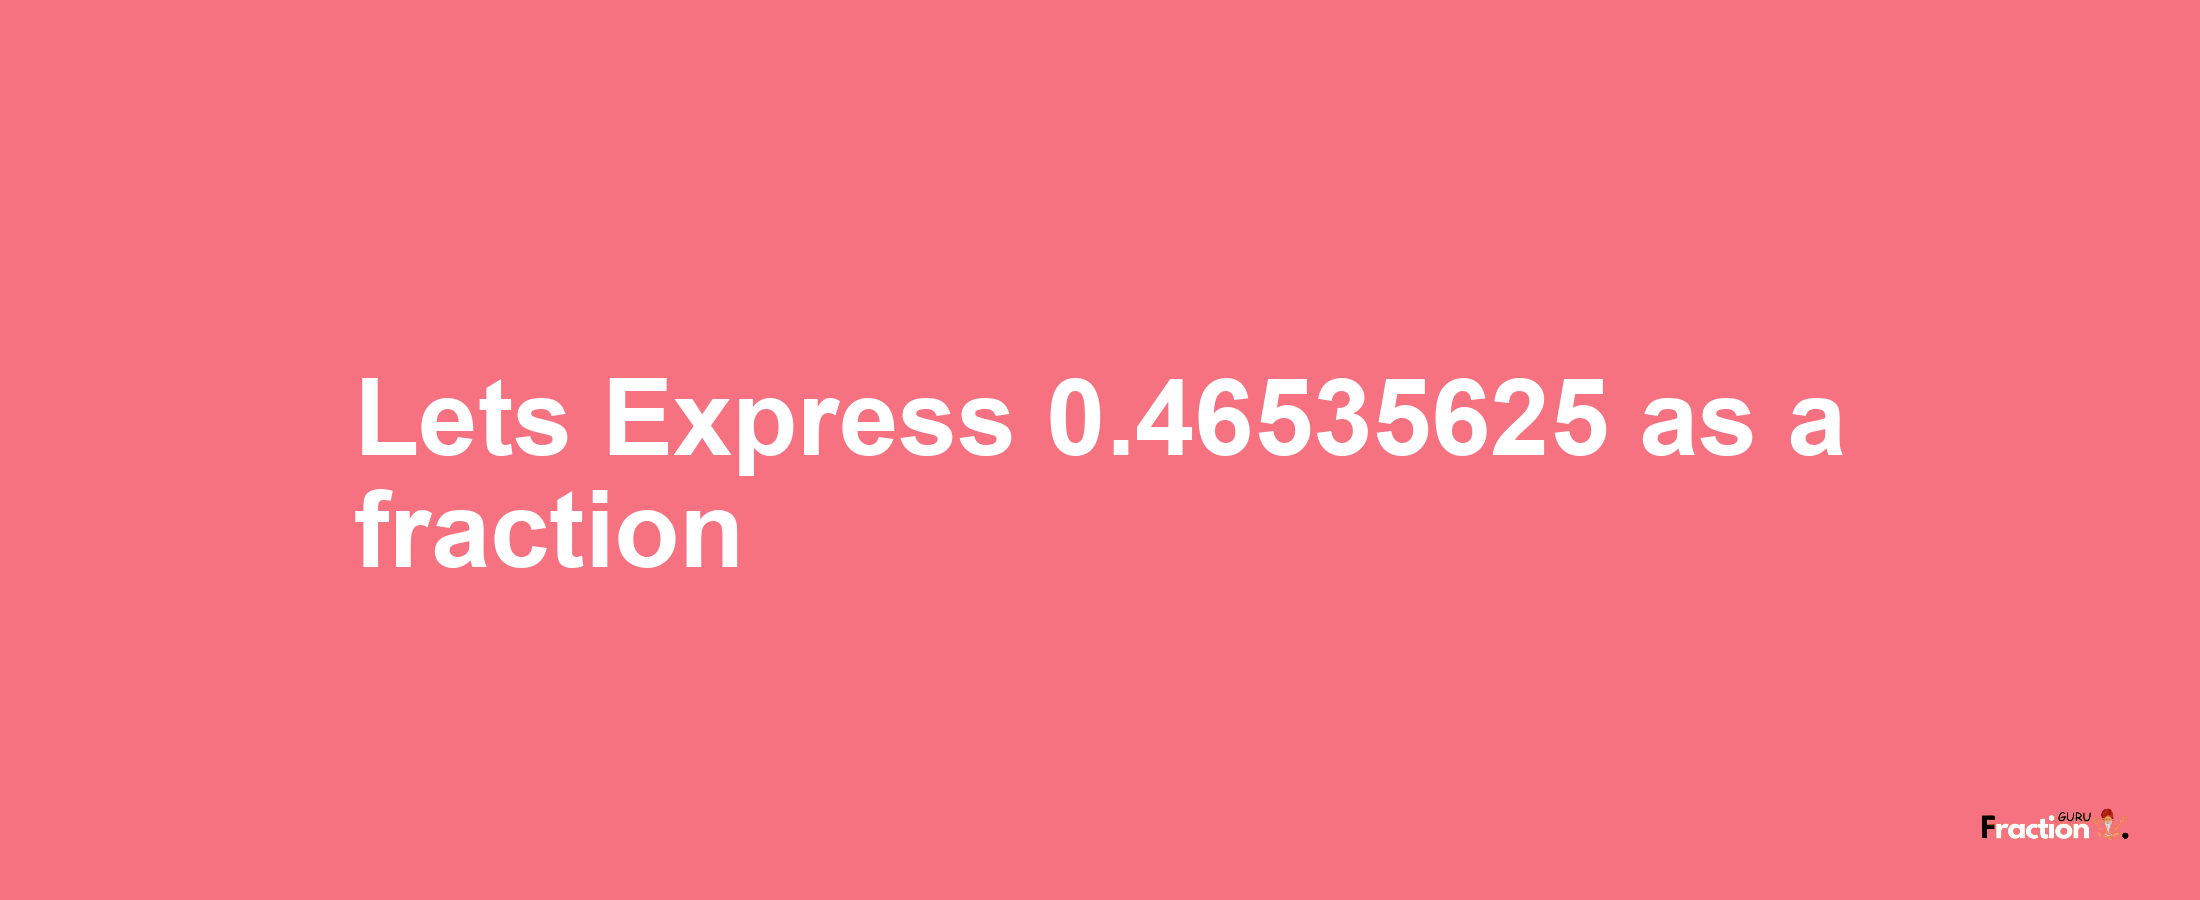 Lets Express 0.46535625 as afraction